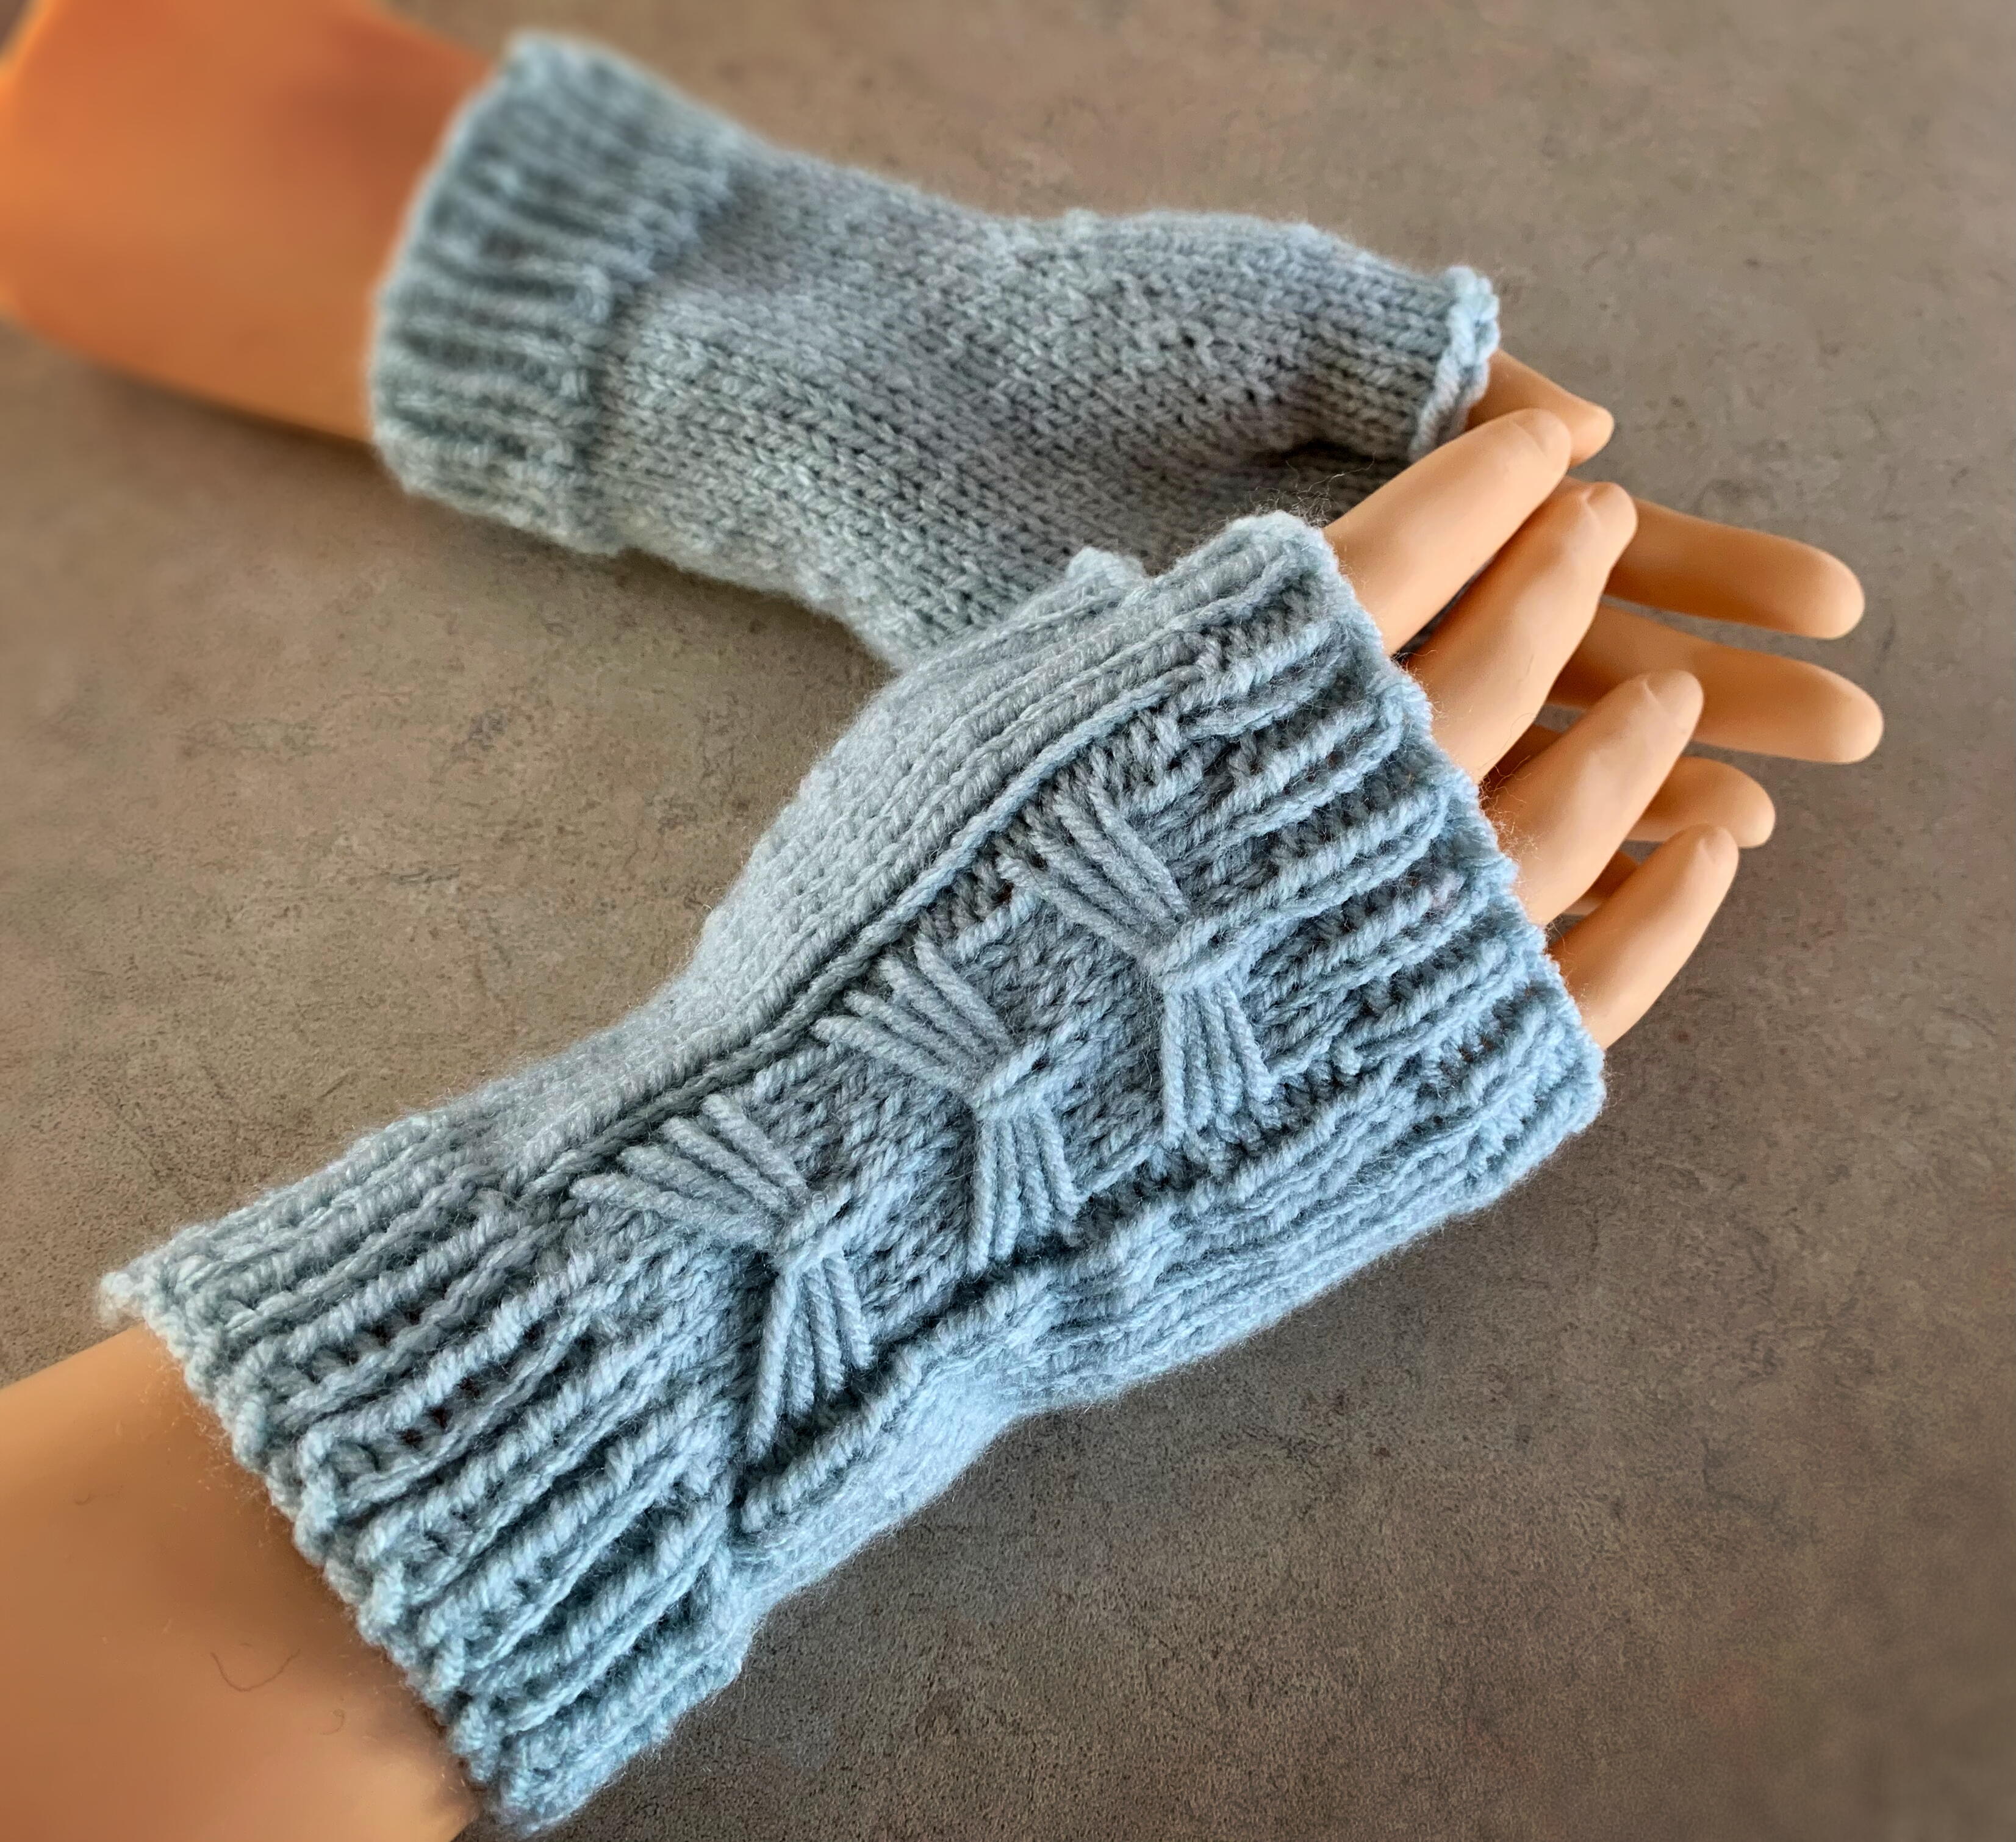 How To Knit Fingerless Arm Warmers Or Mitts With Bows!